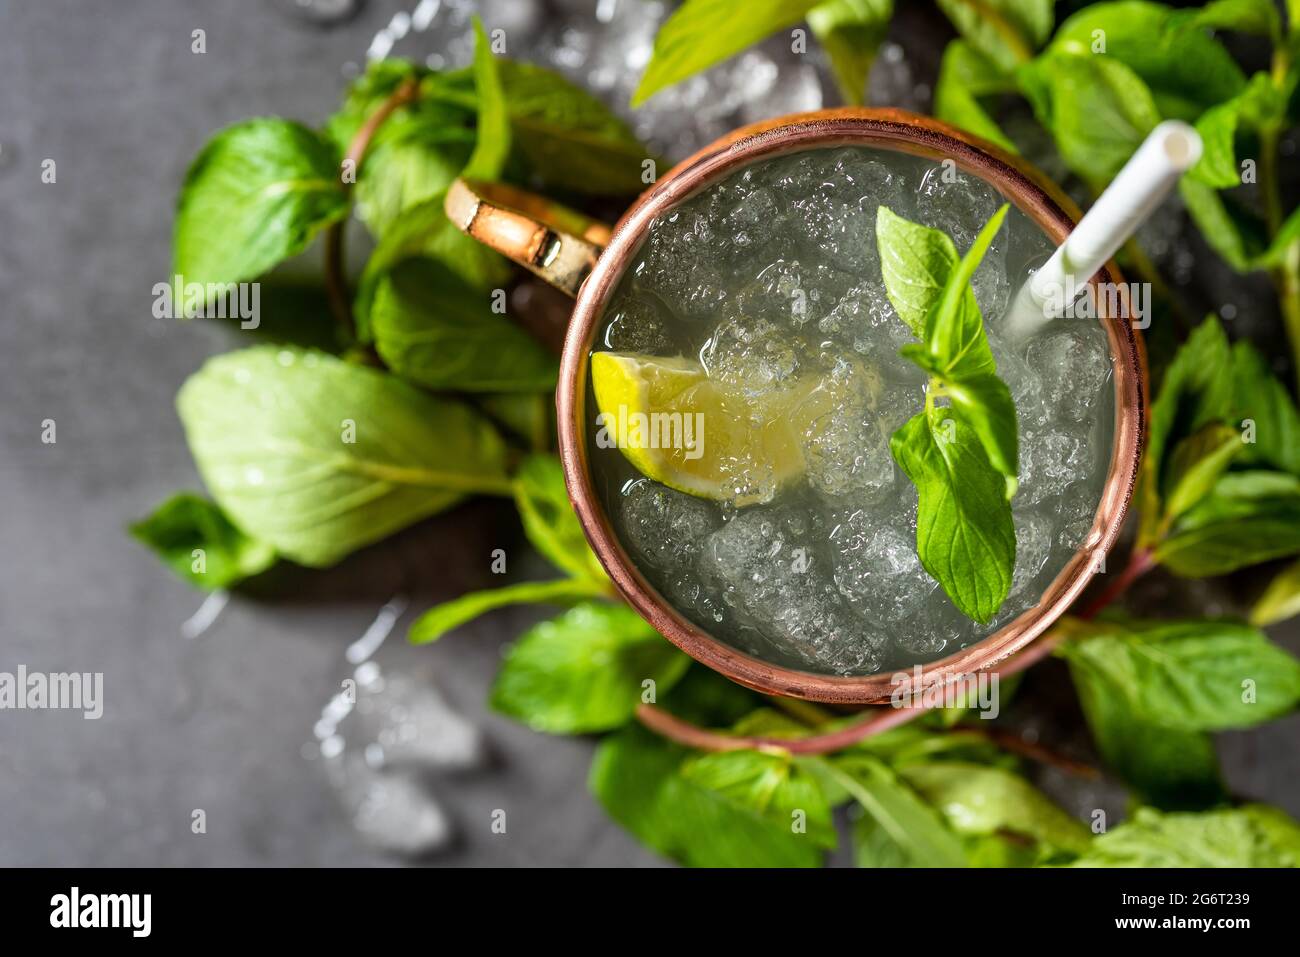 Moscow mule cocktail in copper cup with lime, ginger beer, vodka and mint garnish Stock Photo